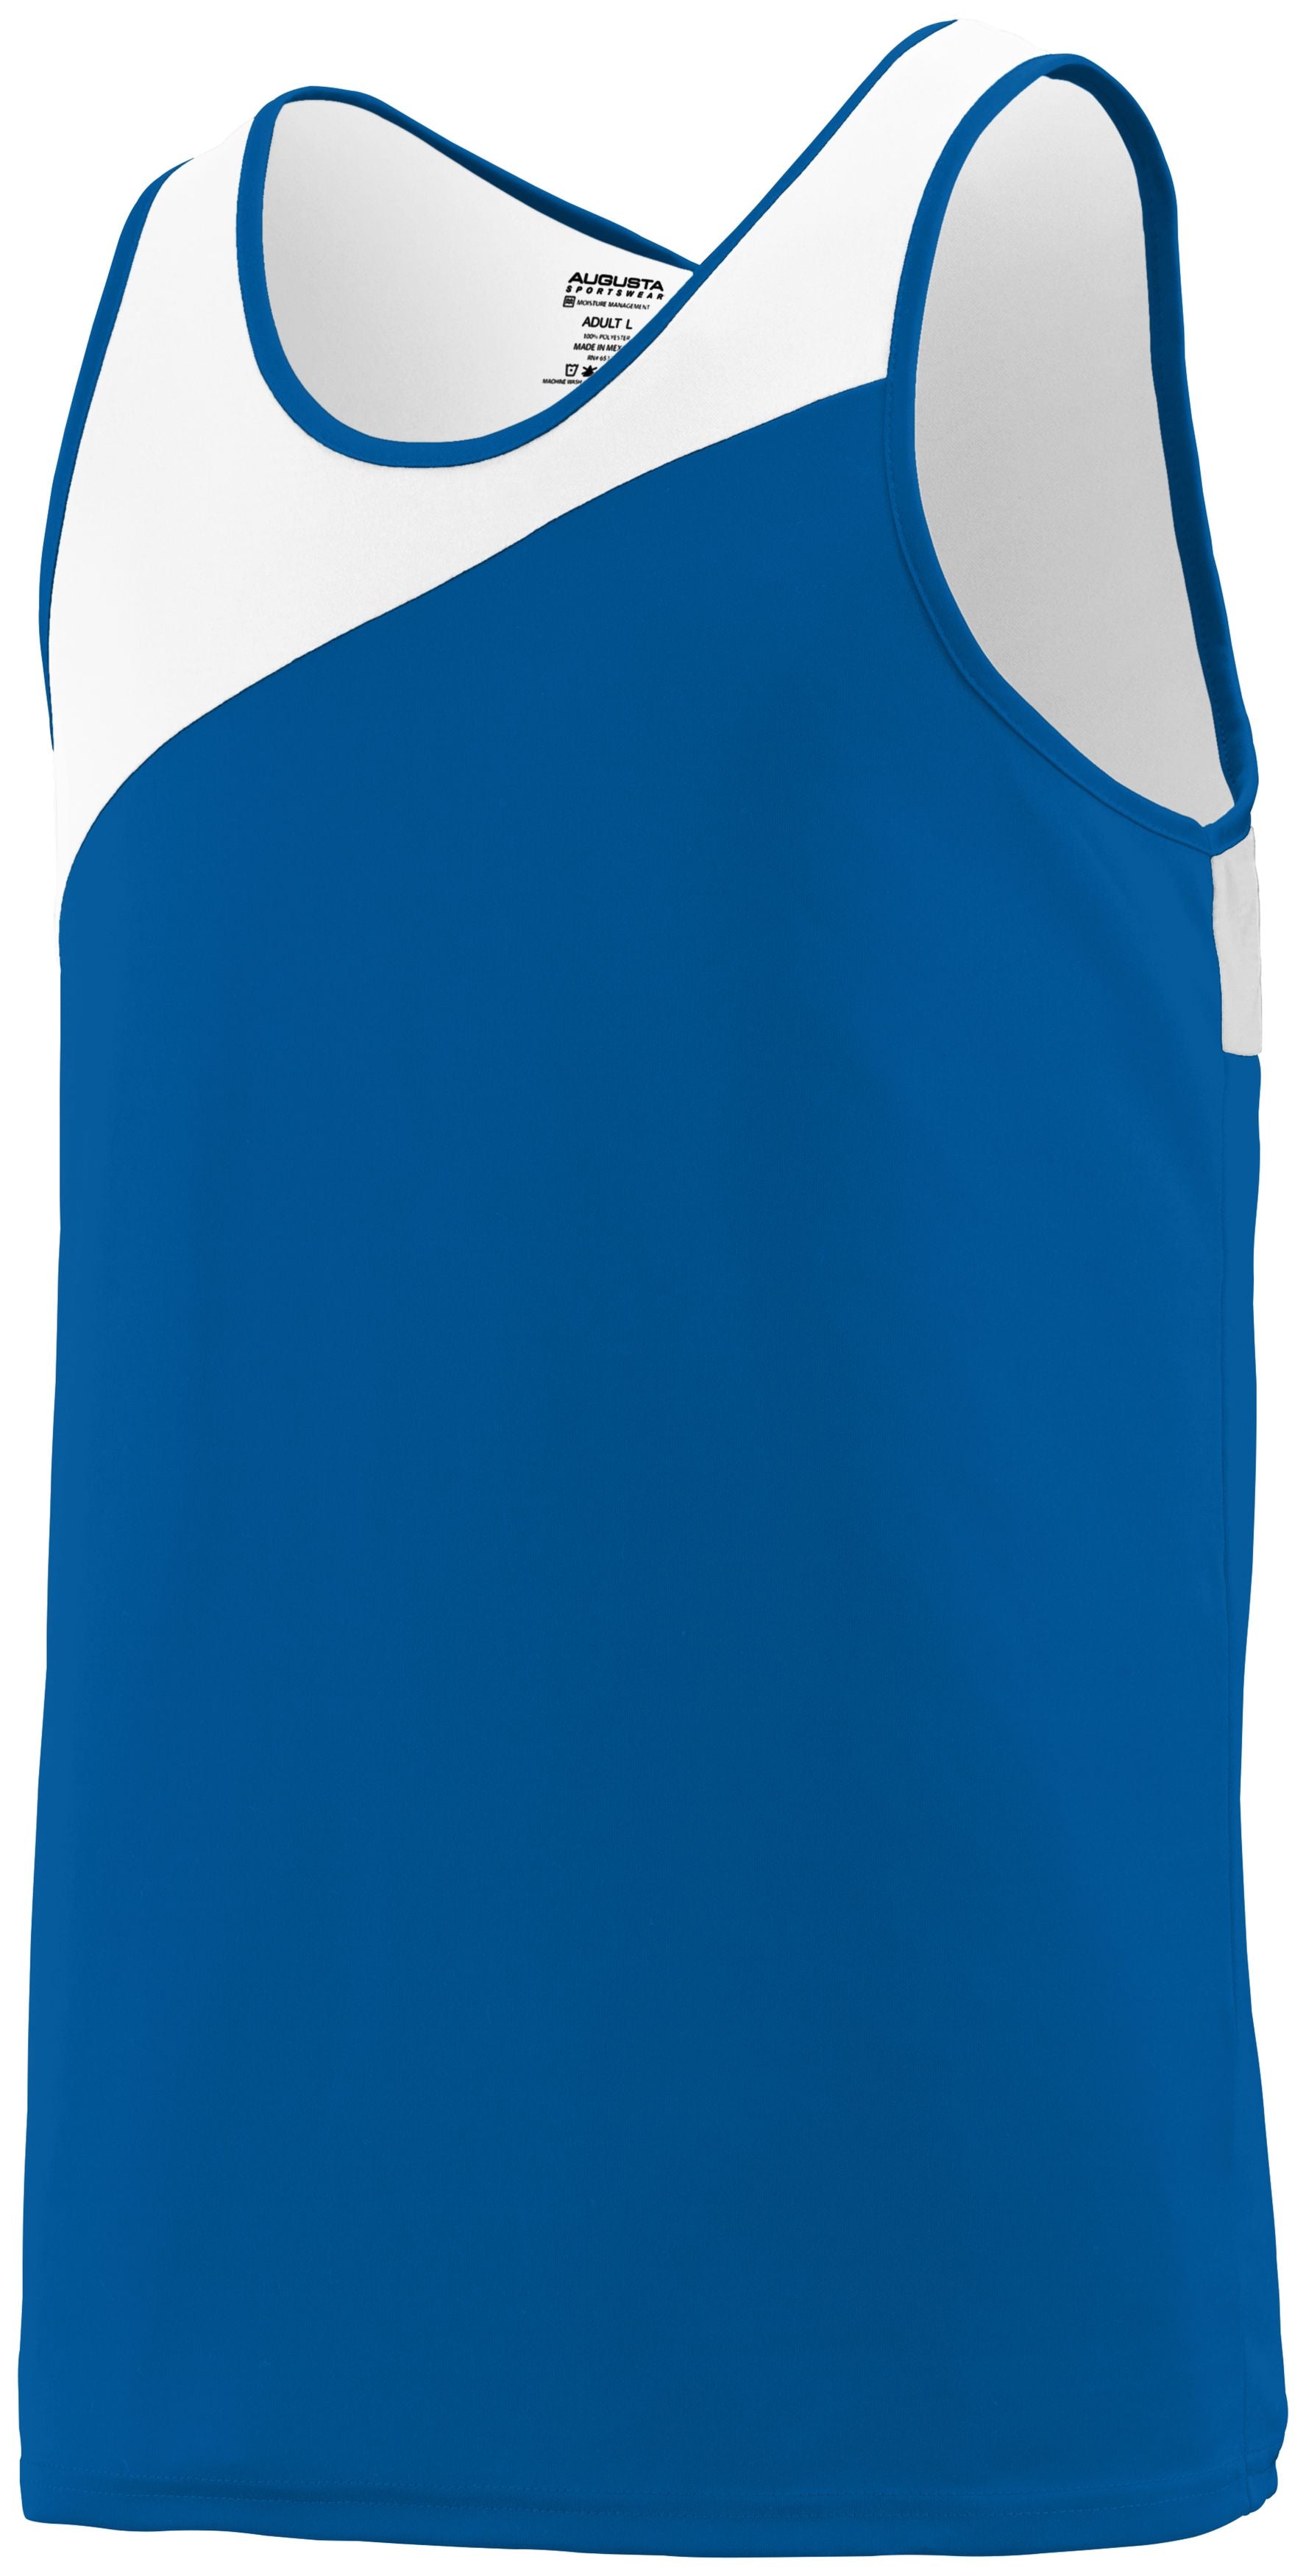 Augusta Sportswear Accelerate Jersey in Royal/White  -Part of the Adult, Adult-Jersey, Augusta-Products, Track-Field, Shirts product lines at KanaleyCreations.com